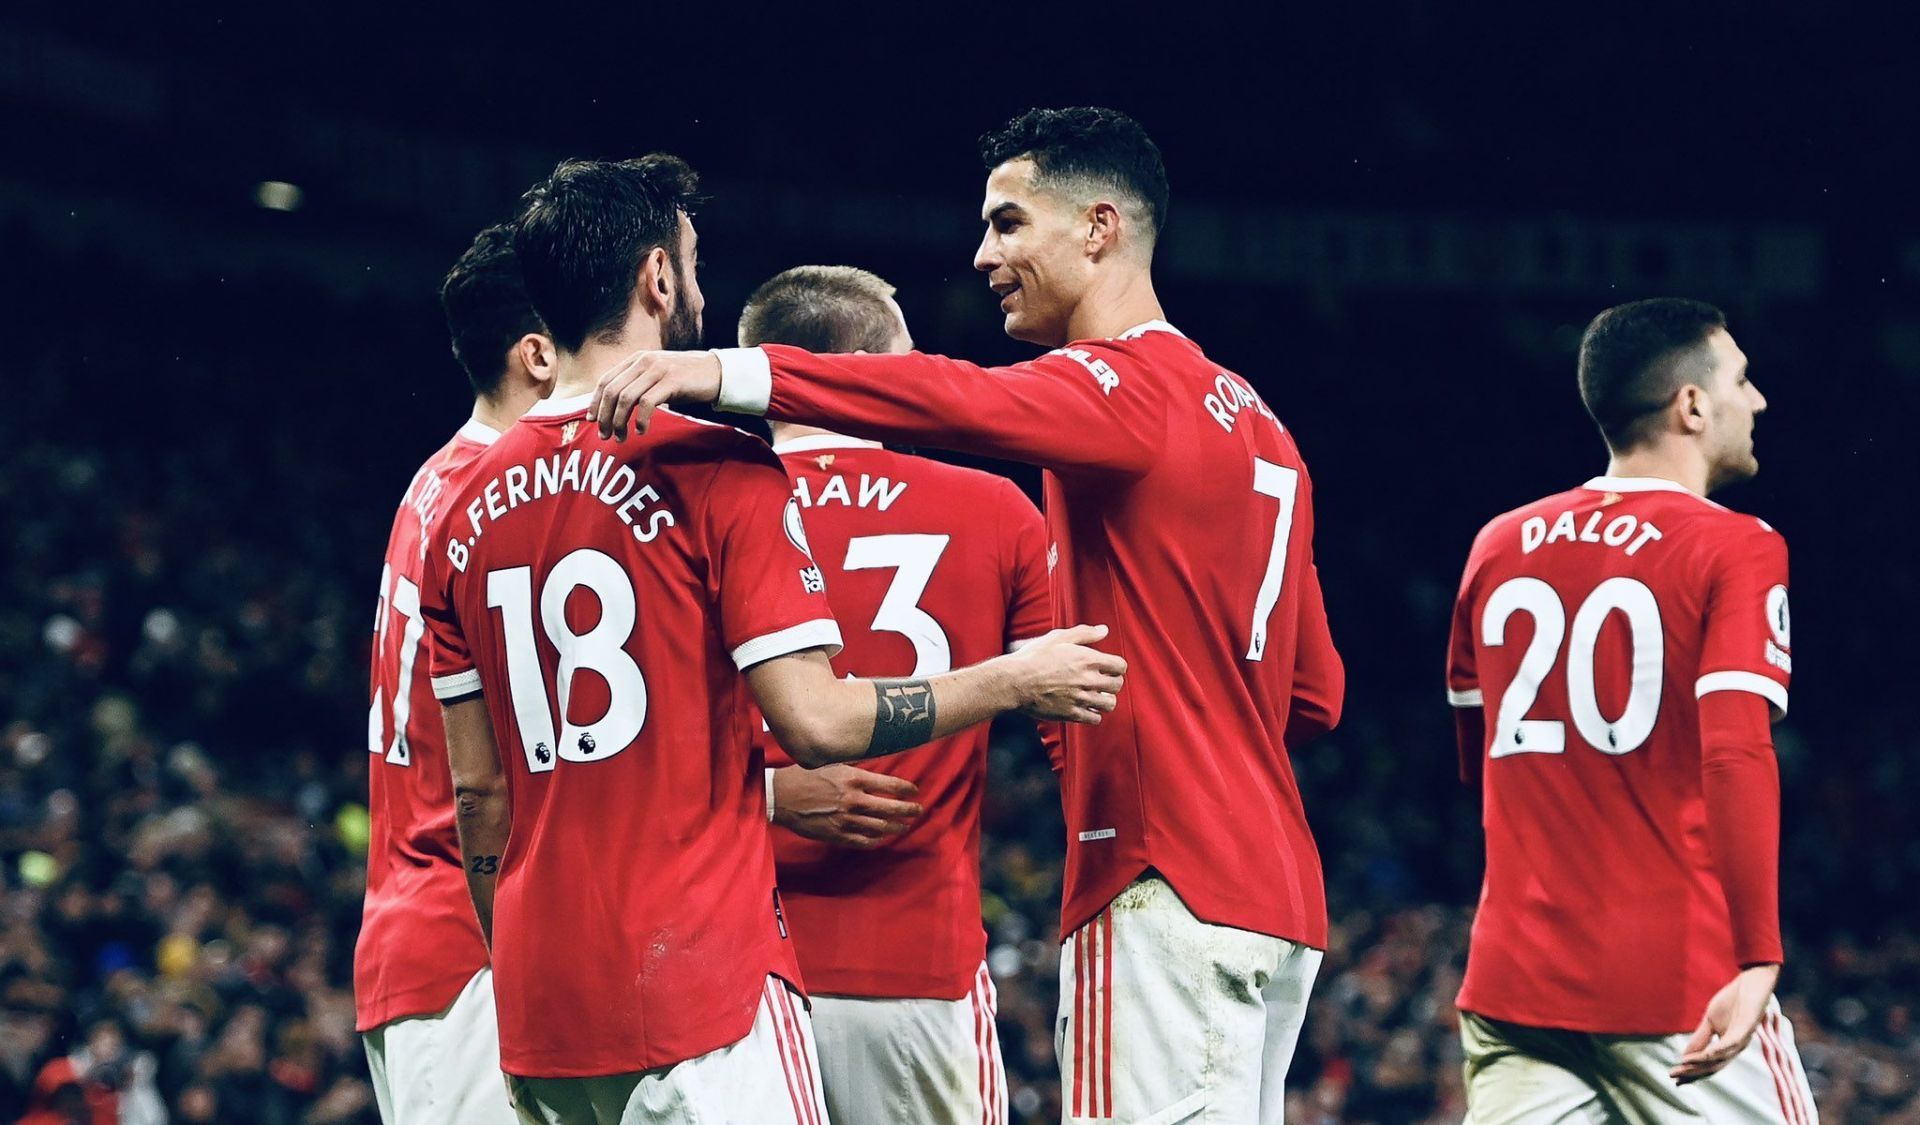 Manchester United ended their 3-game winless run by defeating Brighton.